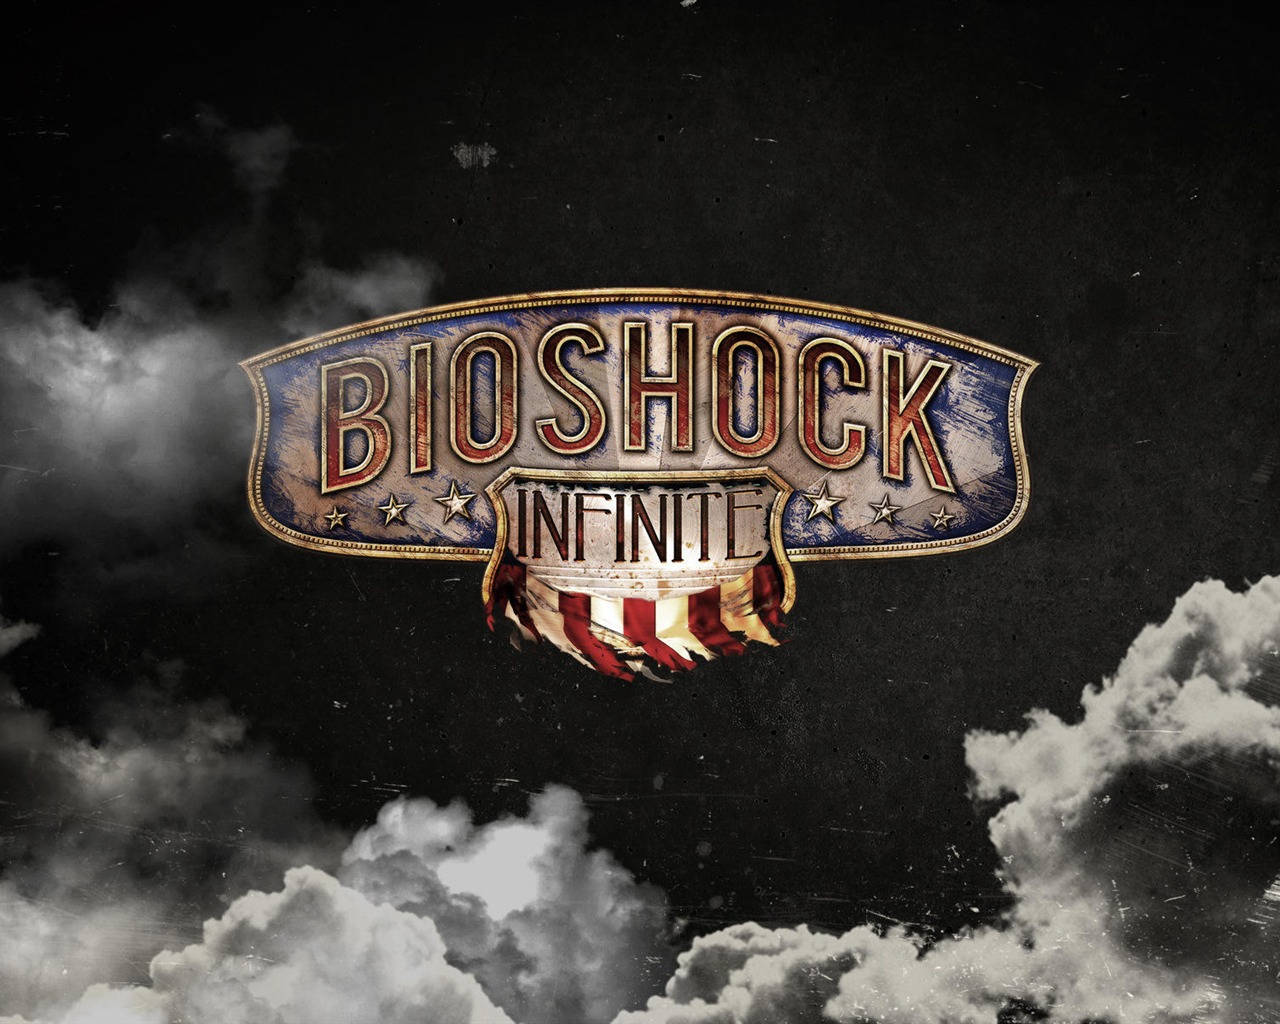 Bioshock Infinite Logo With Clouds In The Background Wallpaper